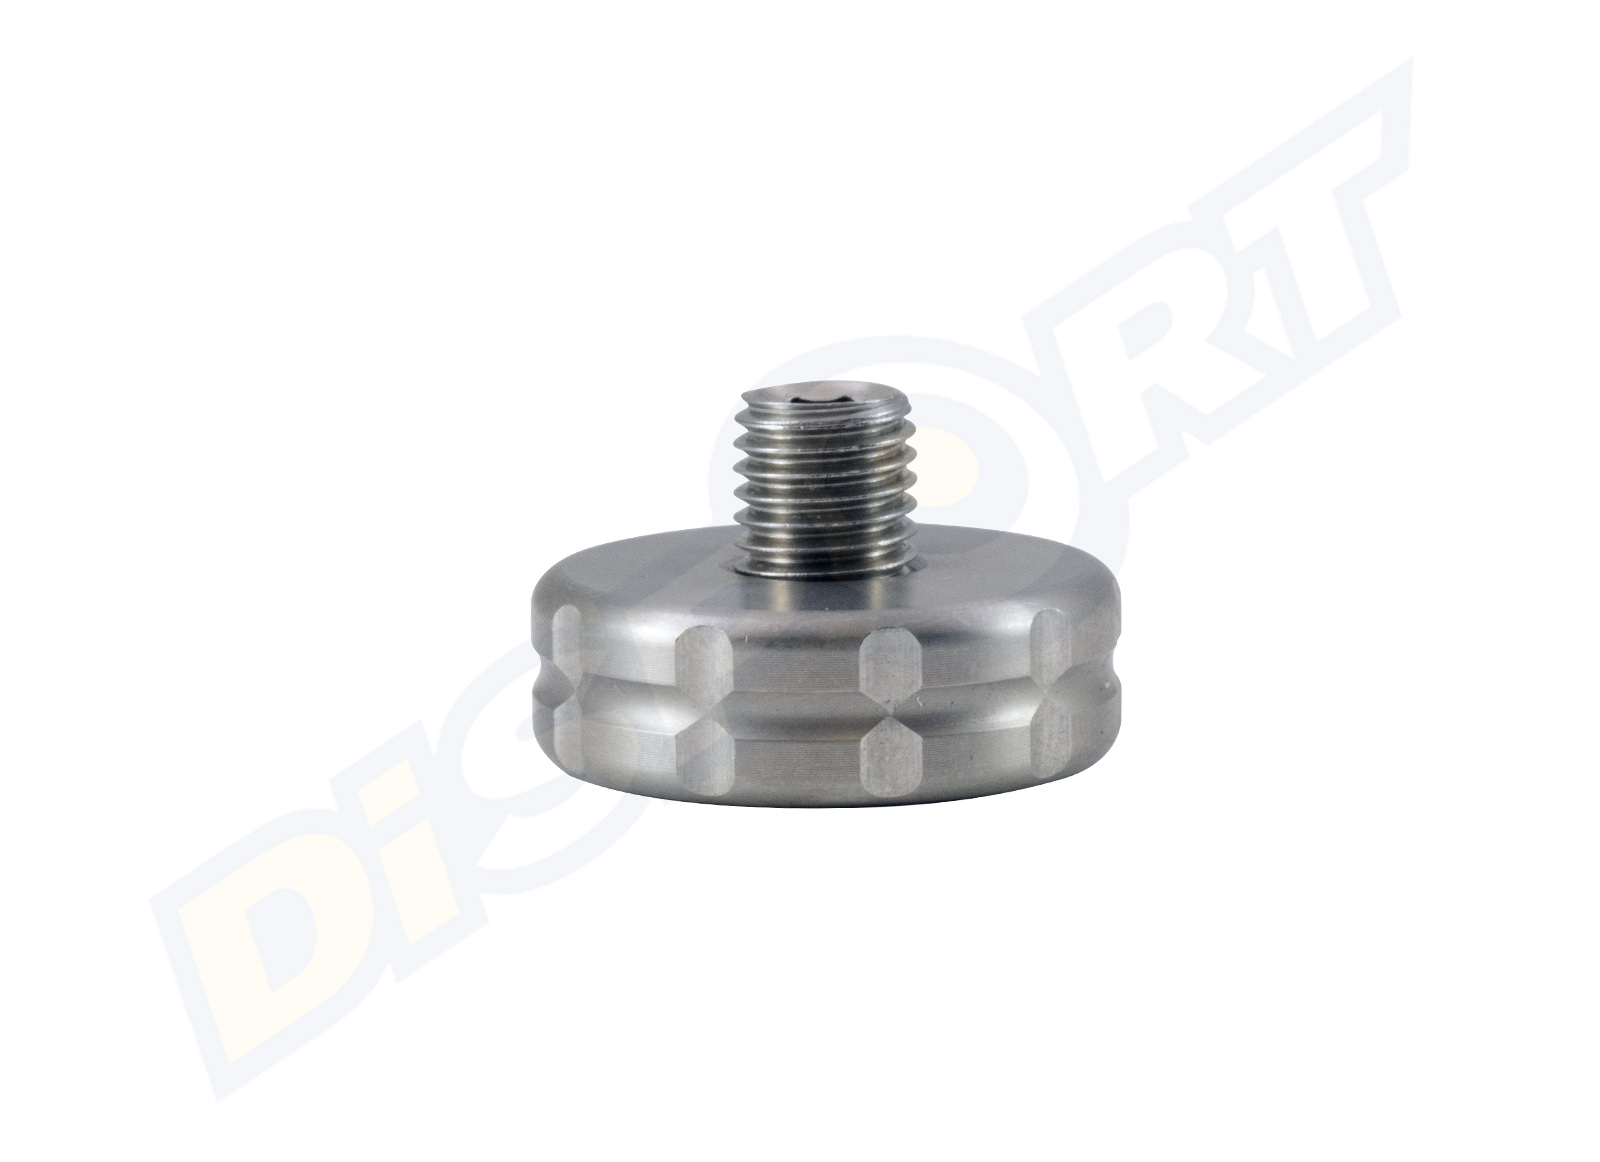 AXCEL PESI PER STABILIZZATORE 1OZ 1.00'' STAINLESS STEEL (3pcs)